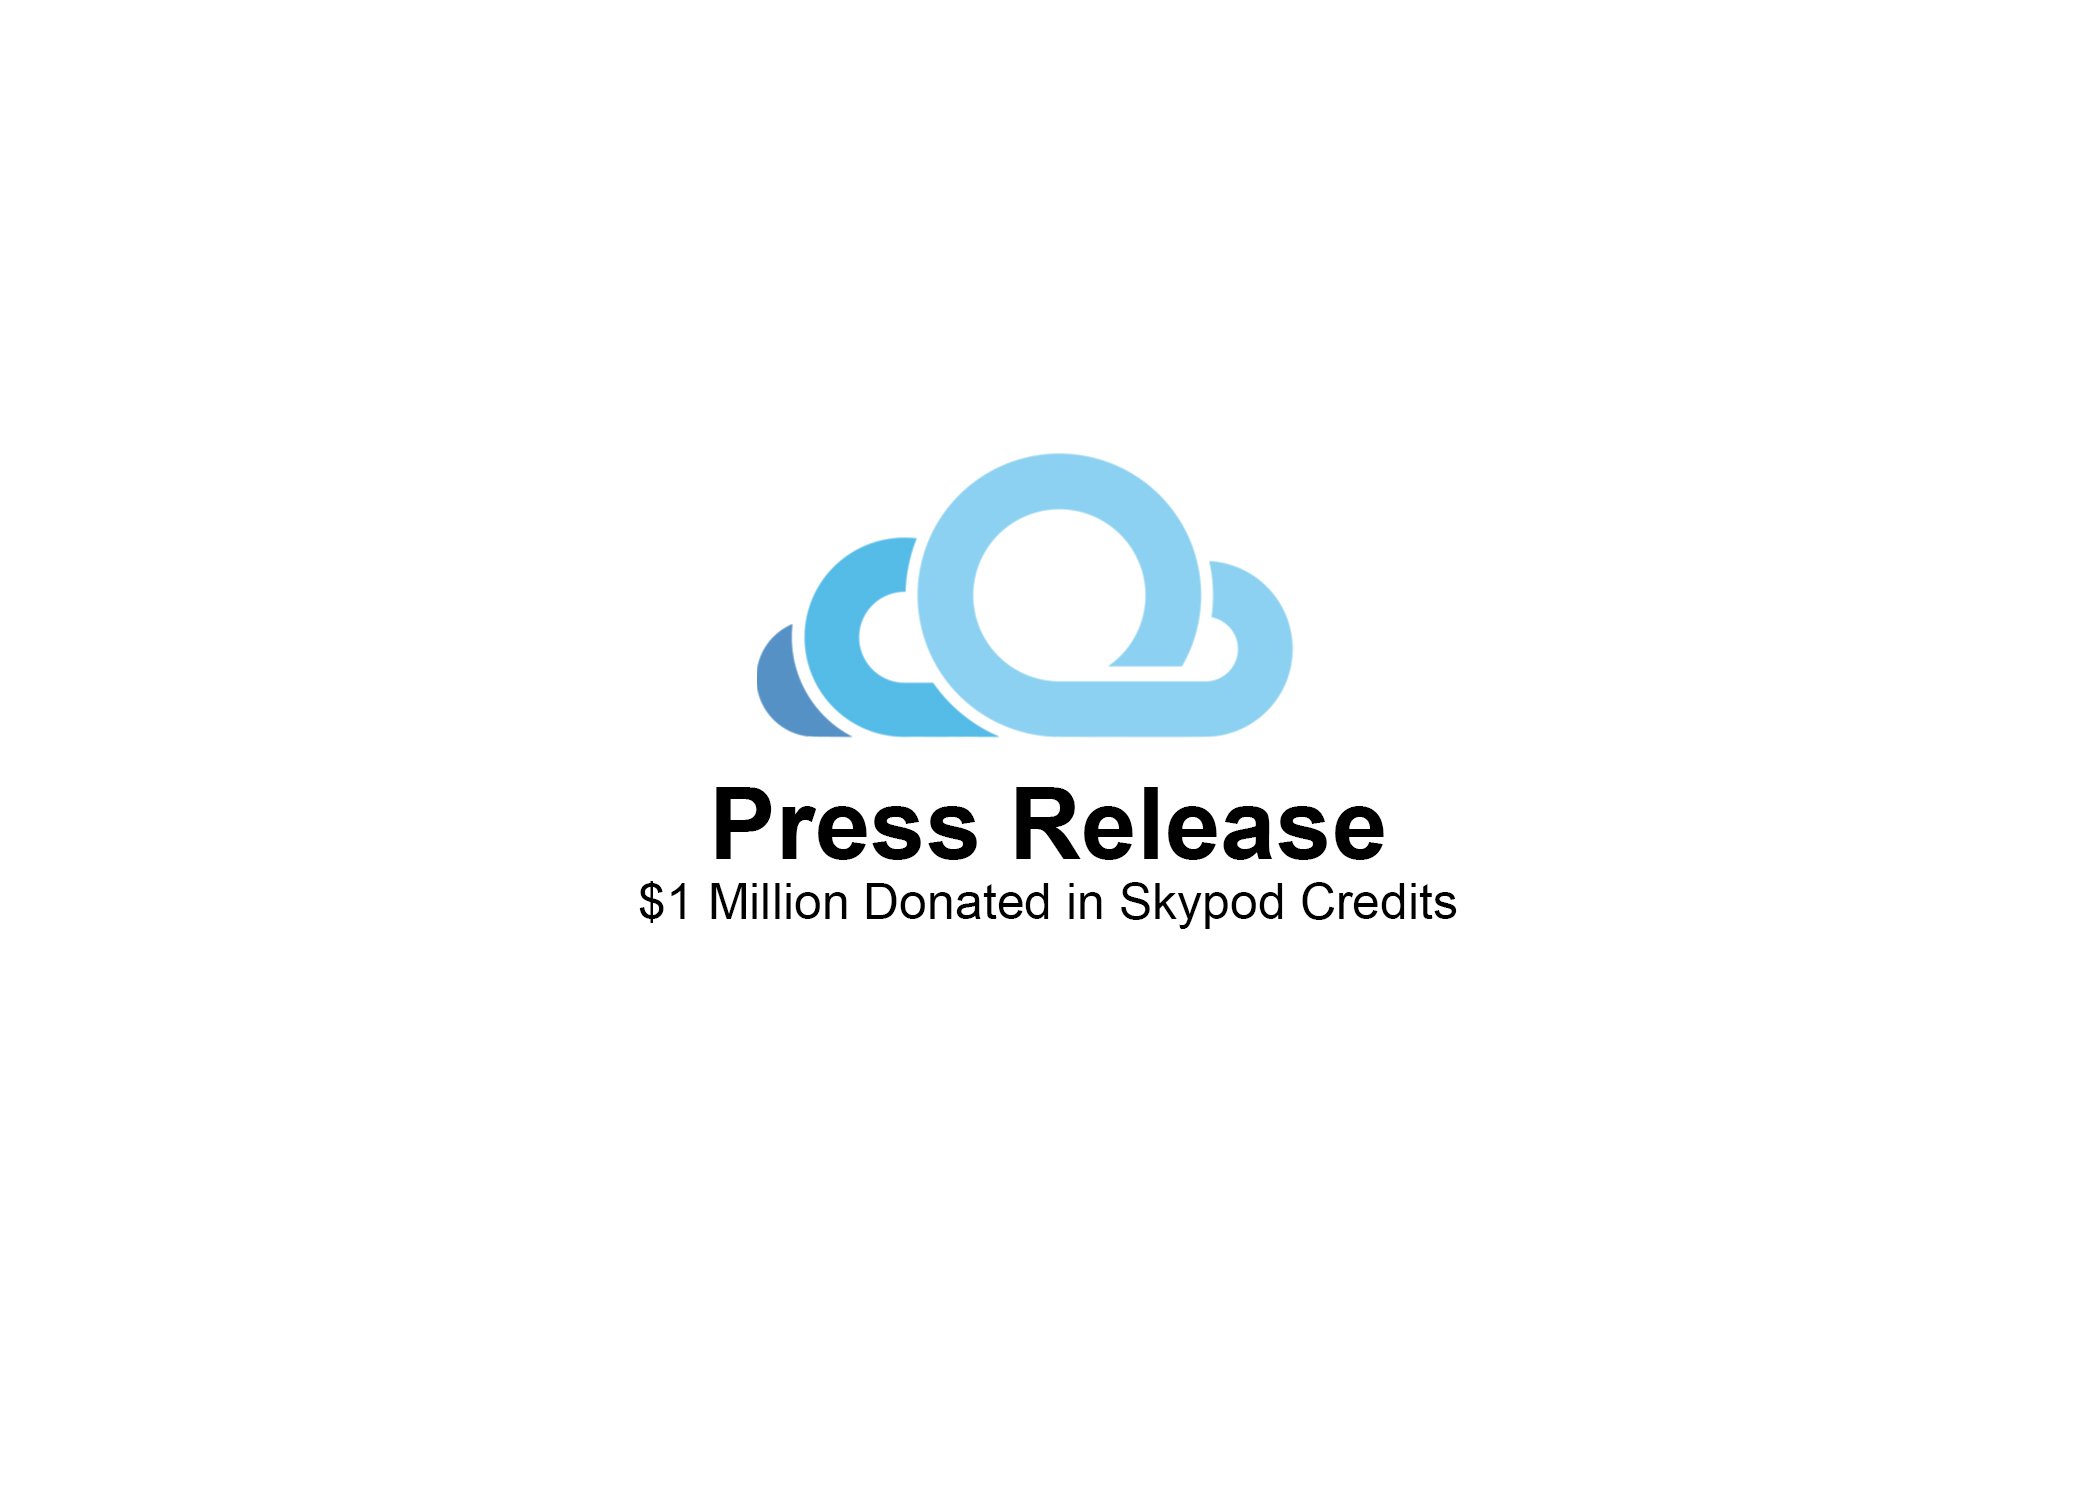 Skypod.com Donates $1 Million in Credits to First Responders, Healthcare Workers and Covid-19 Patients Amid Pandemic